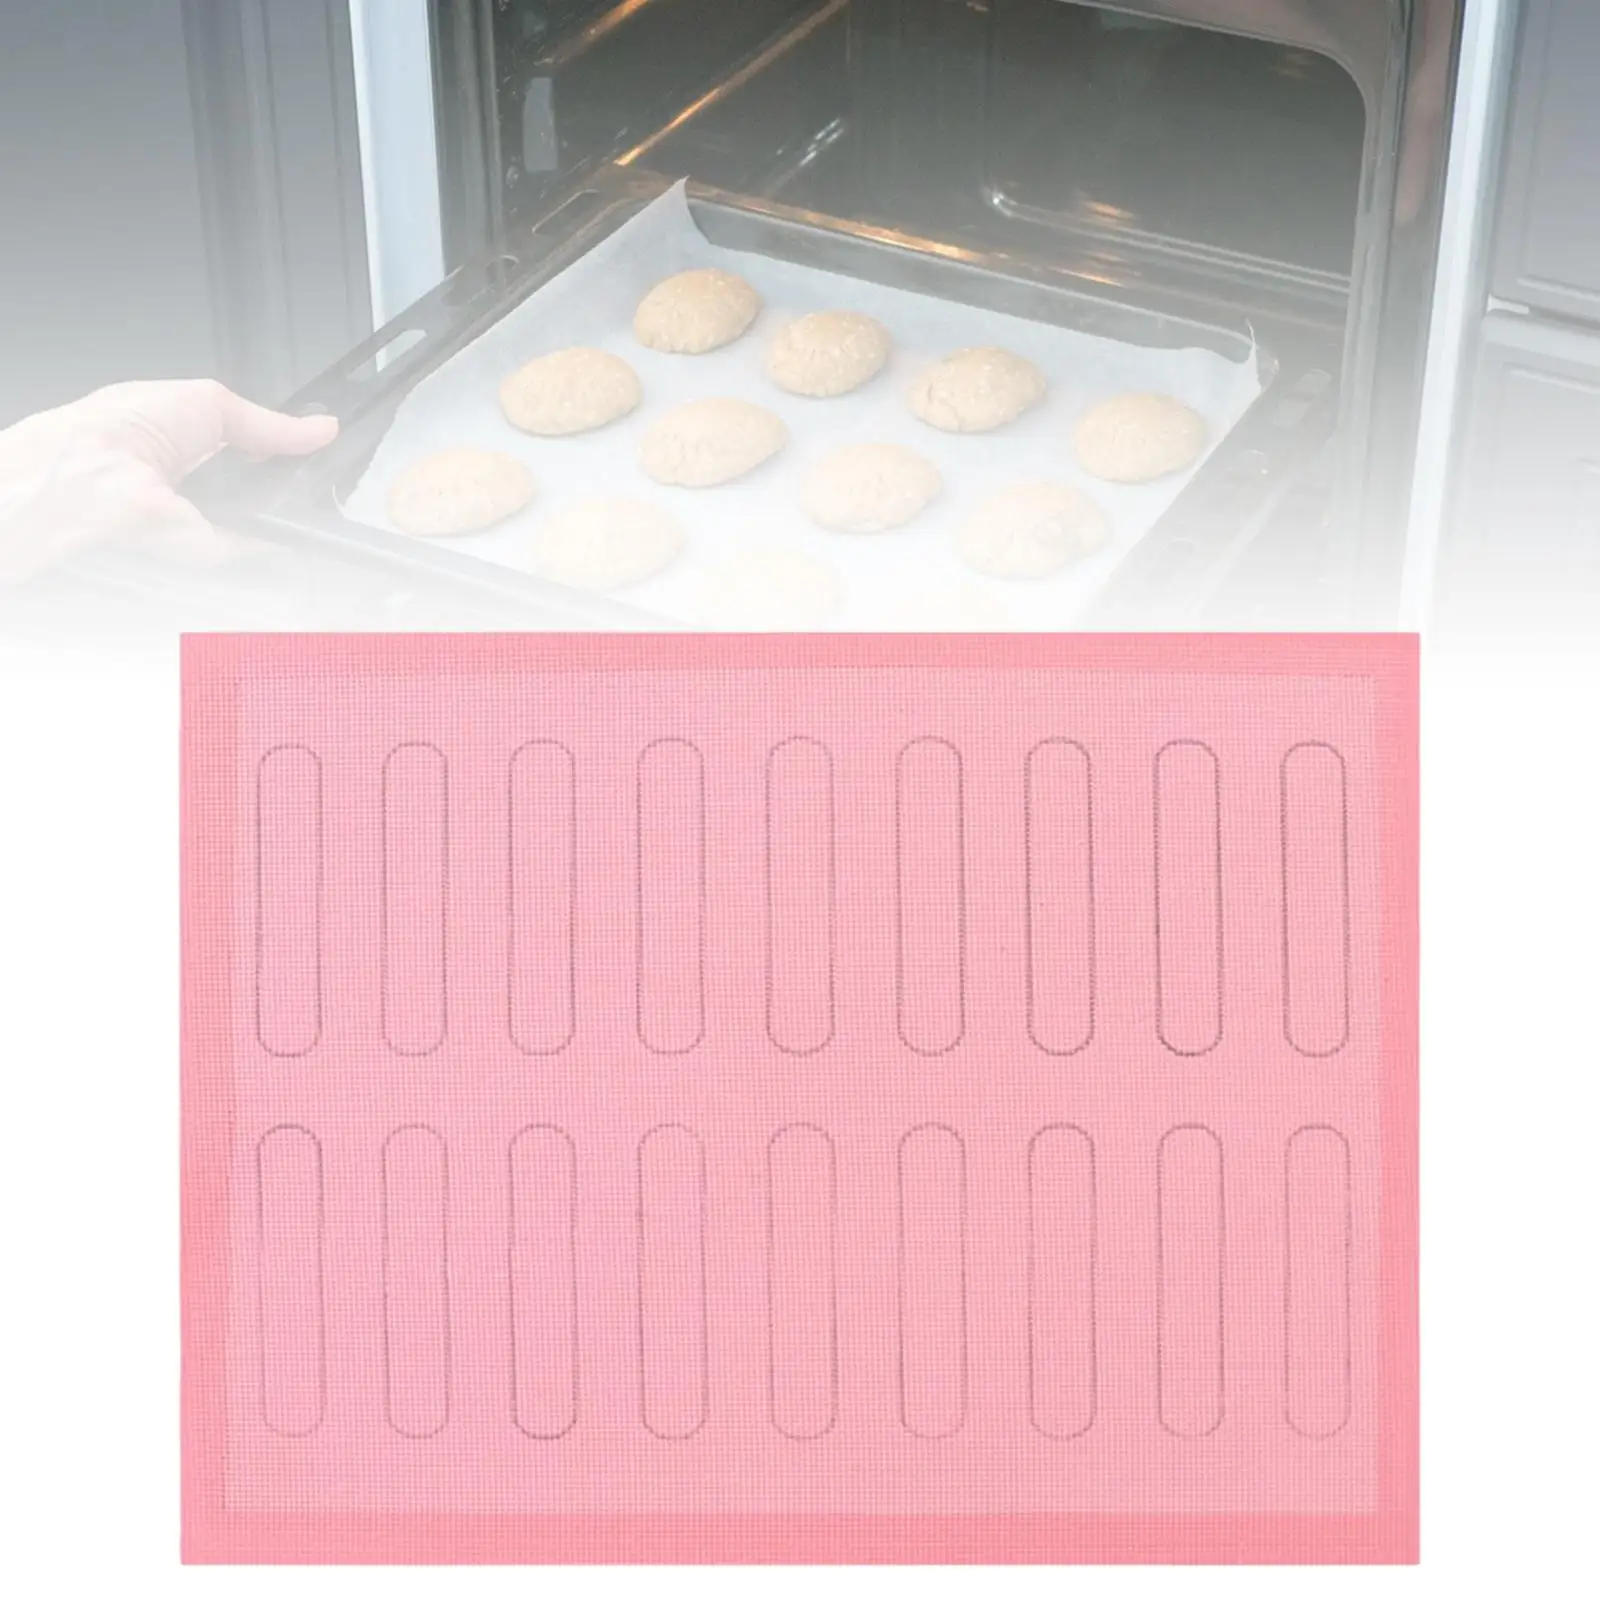 Silicone Baking Mat Bread Making Tools Nonstick Heat Resistant Bakeware Mat Cookie Mat Baking Sheet for Home Cafe Restaurant